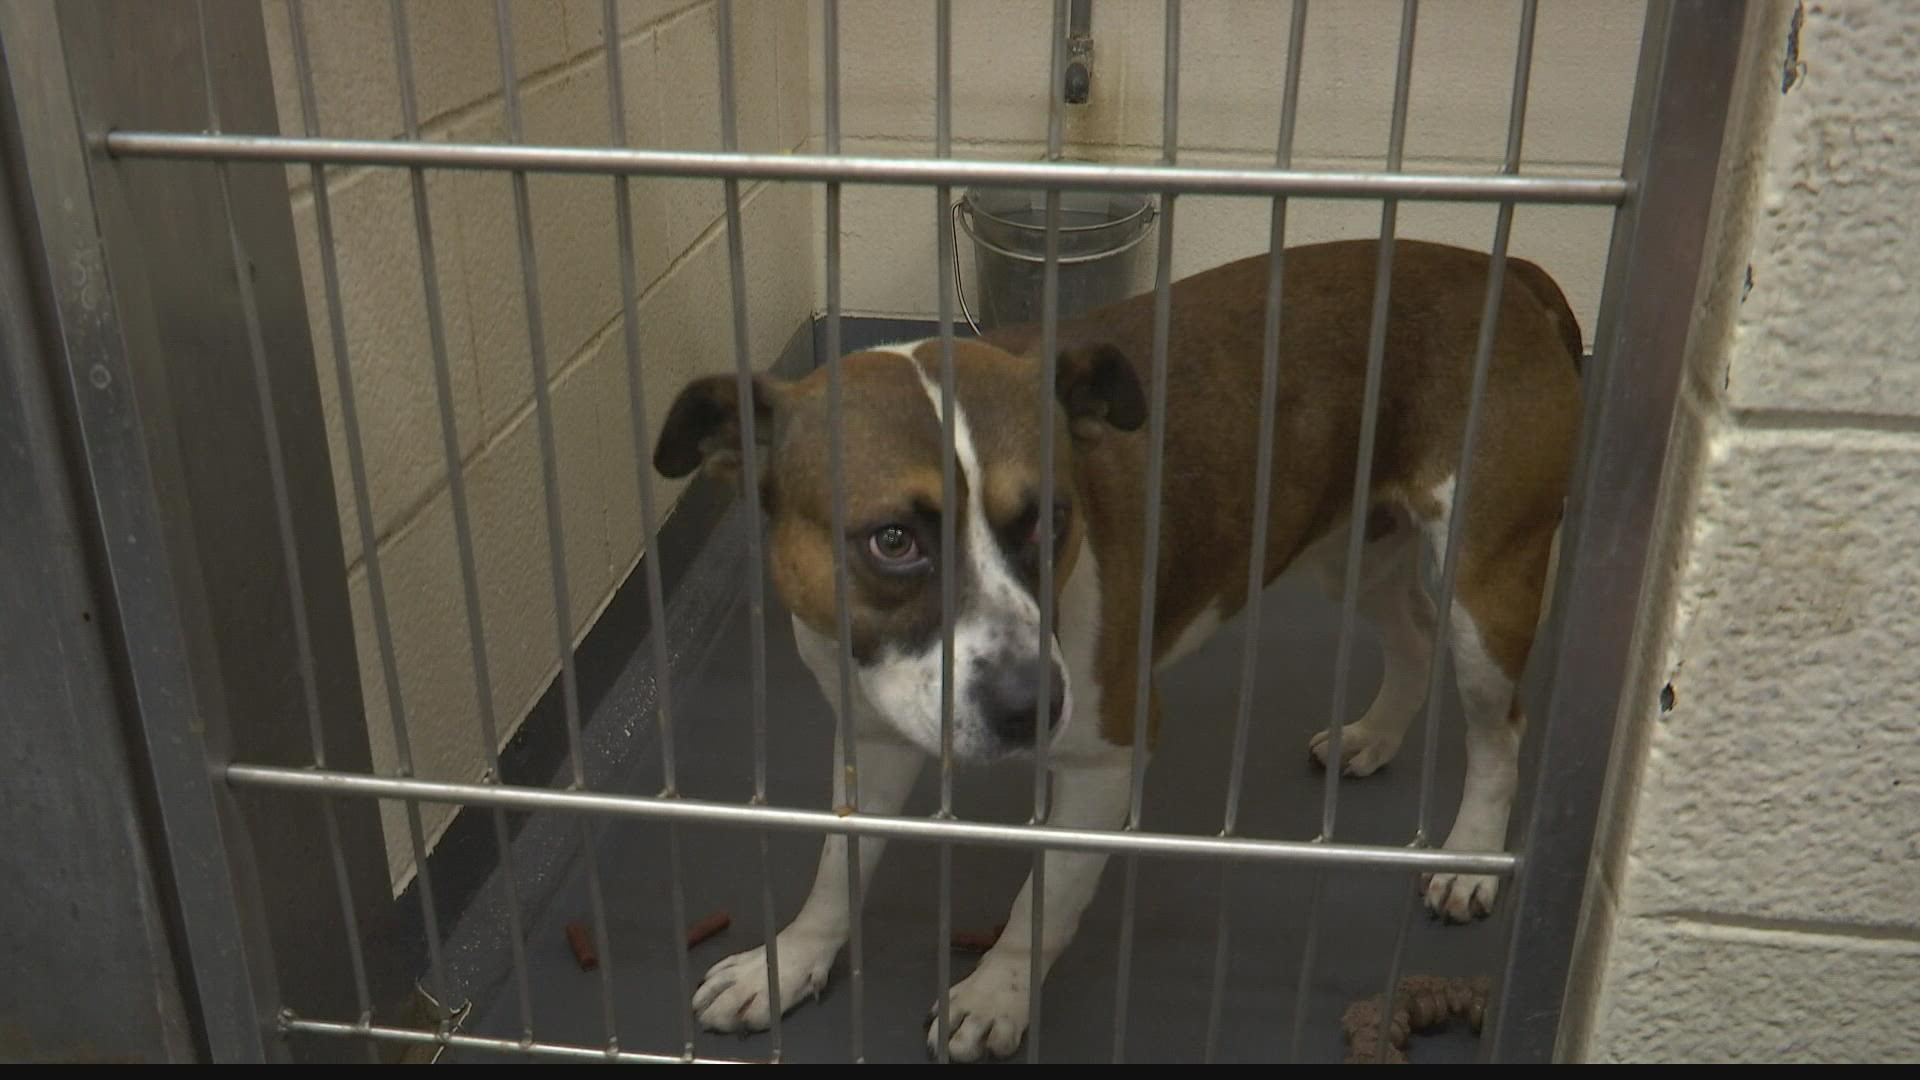 IACS is extending its hours hoping to encourage adoptions.